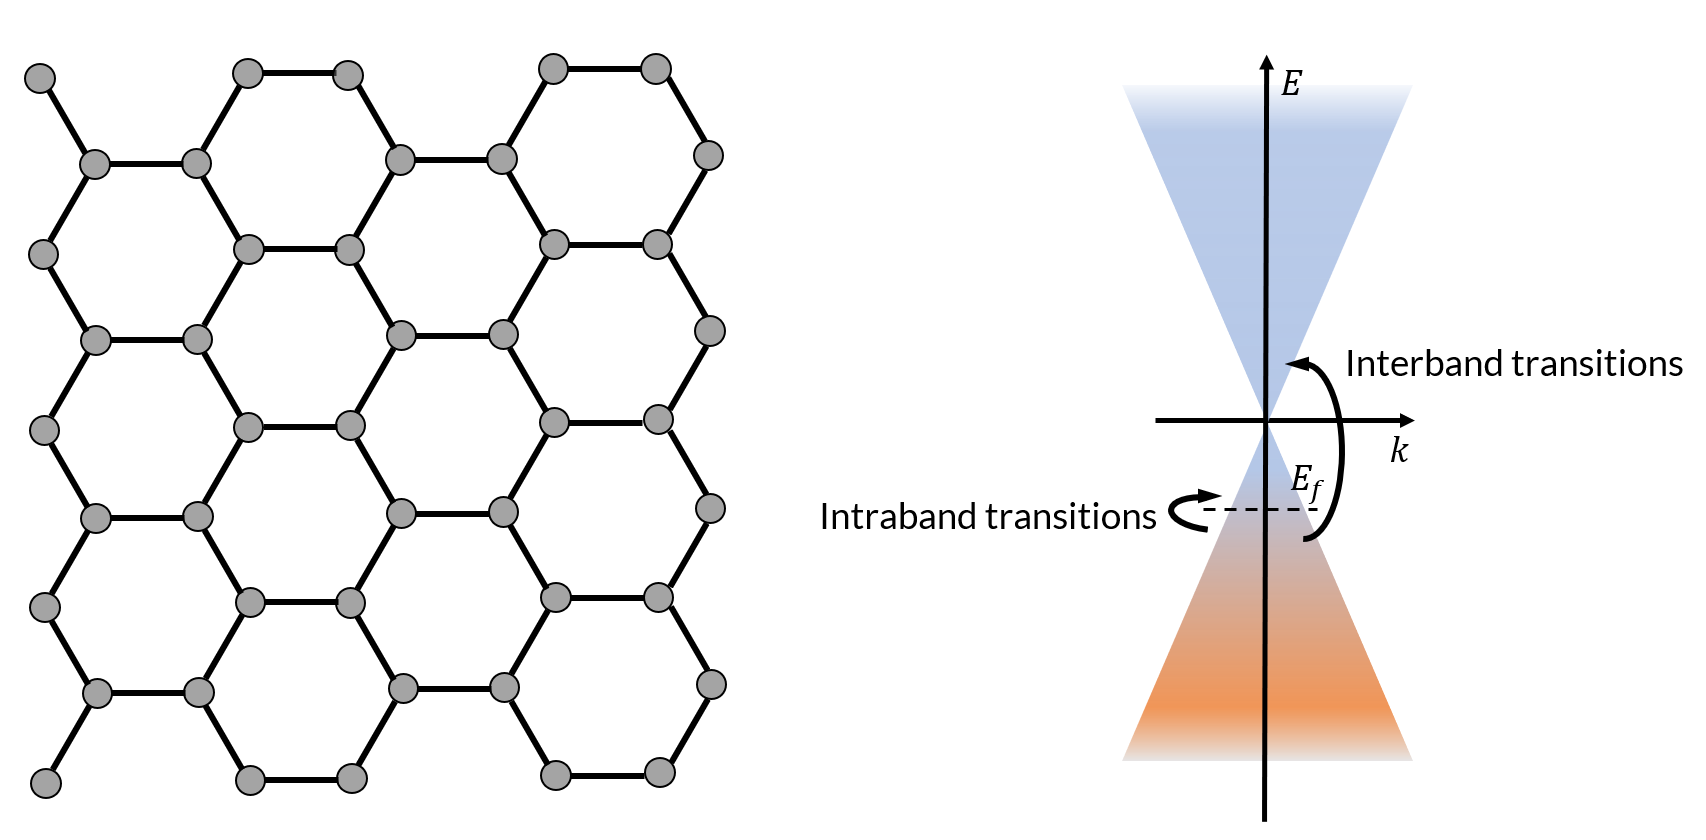 The illustration on the left shows a representation of the hexagonal structure of graphene. The illustration on the right shows a representation of the linear energy-momentum dispersion relation in graphene.